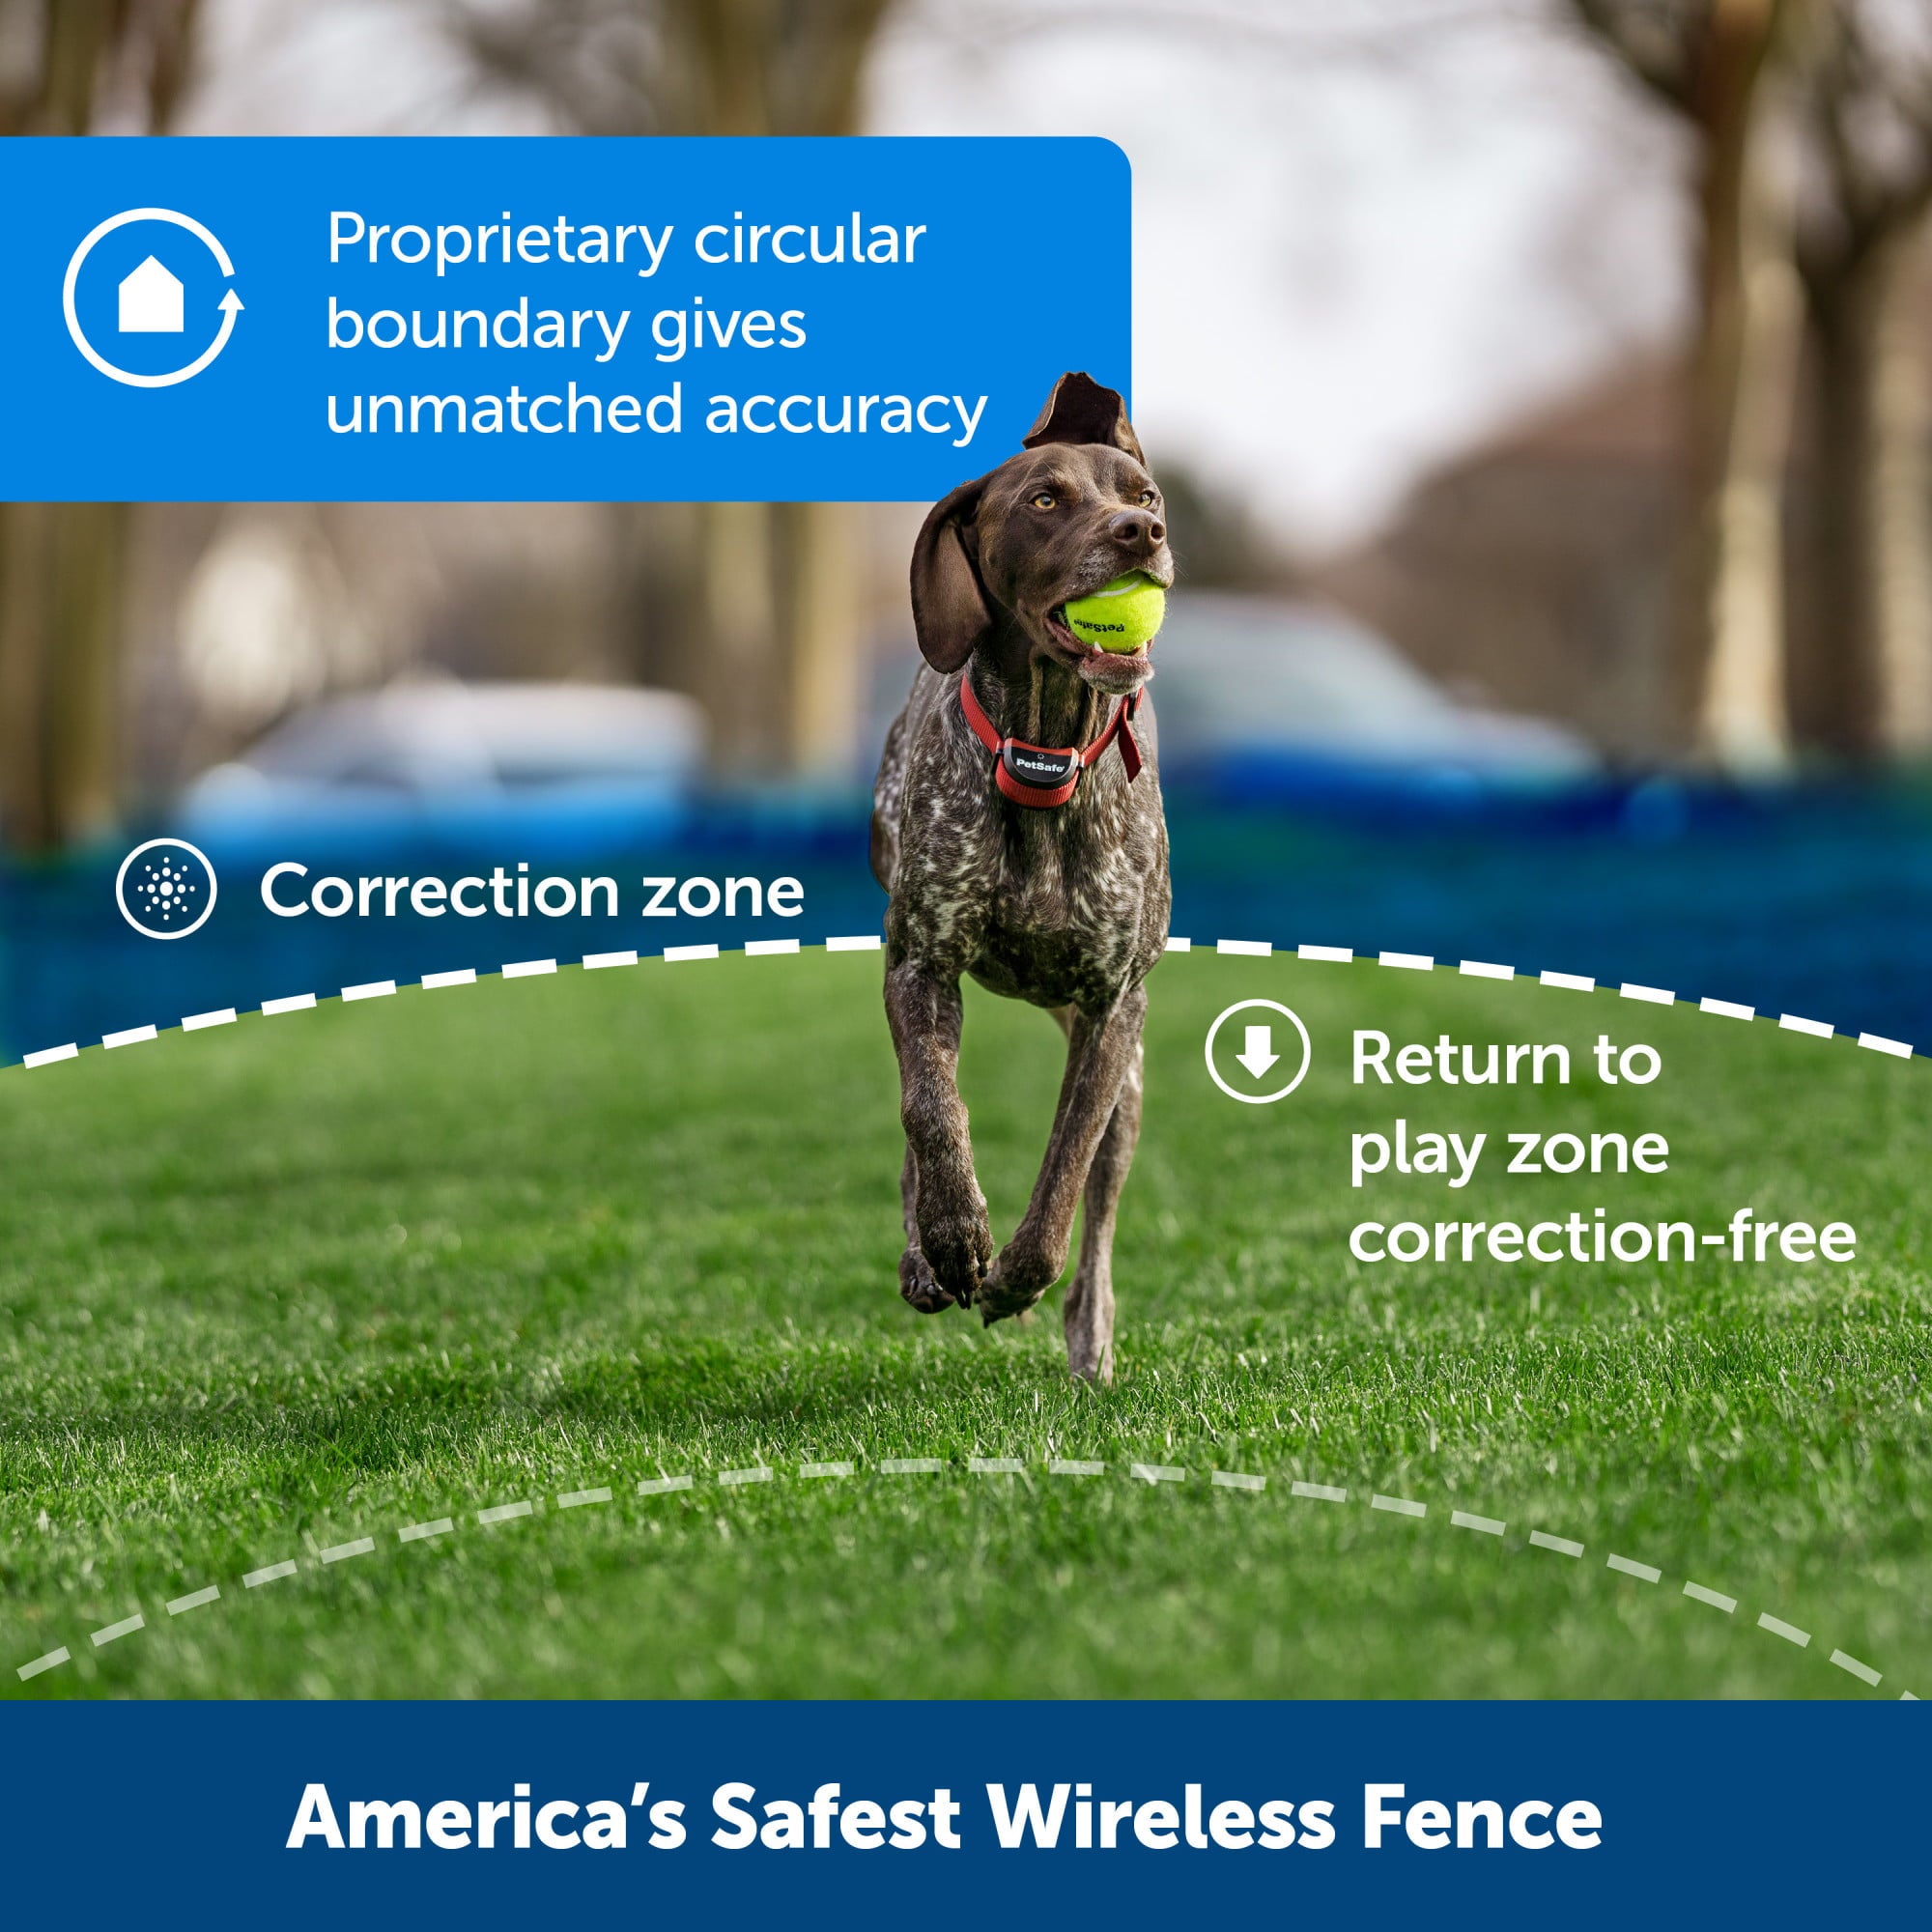 PetSafe Stubborn Dog Stay and Play Wireless Fence Receiver Collar， Waterproof， Rechargeable